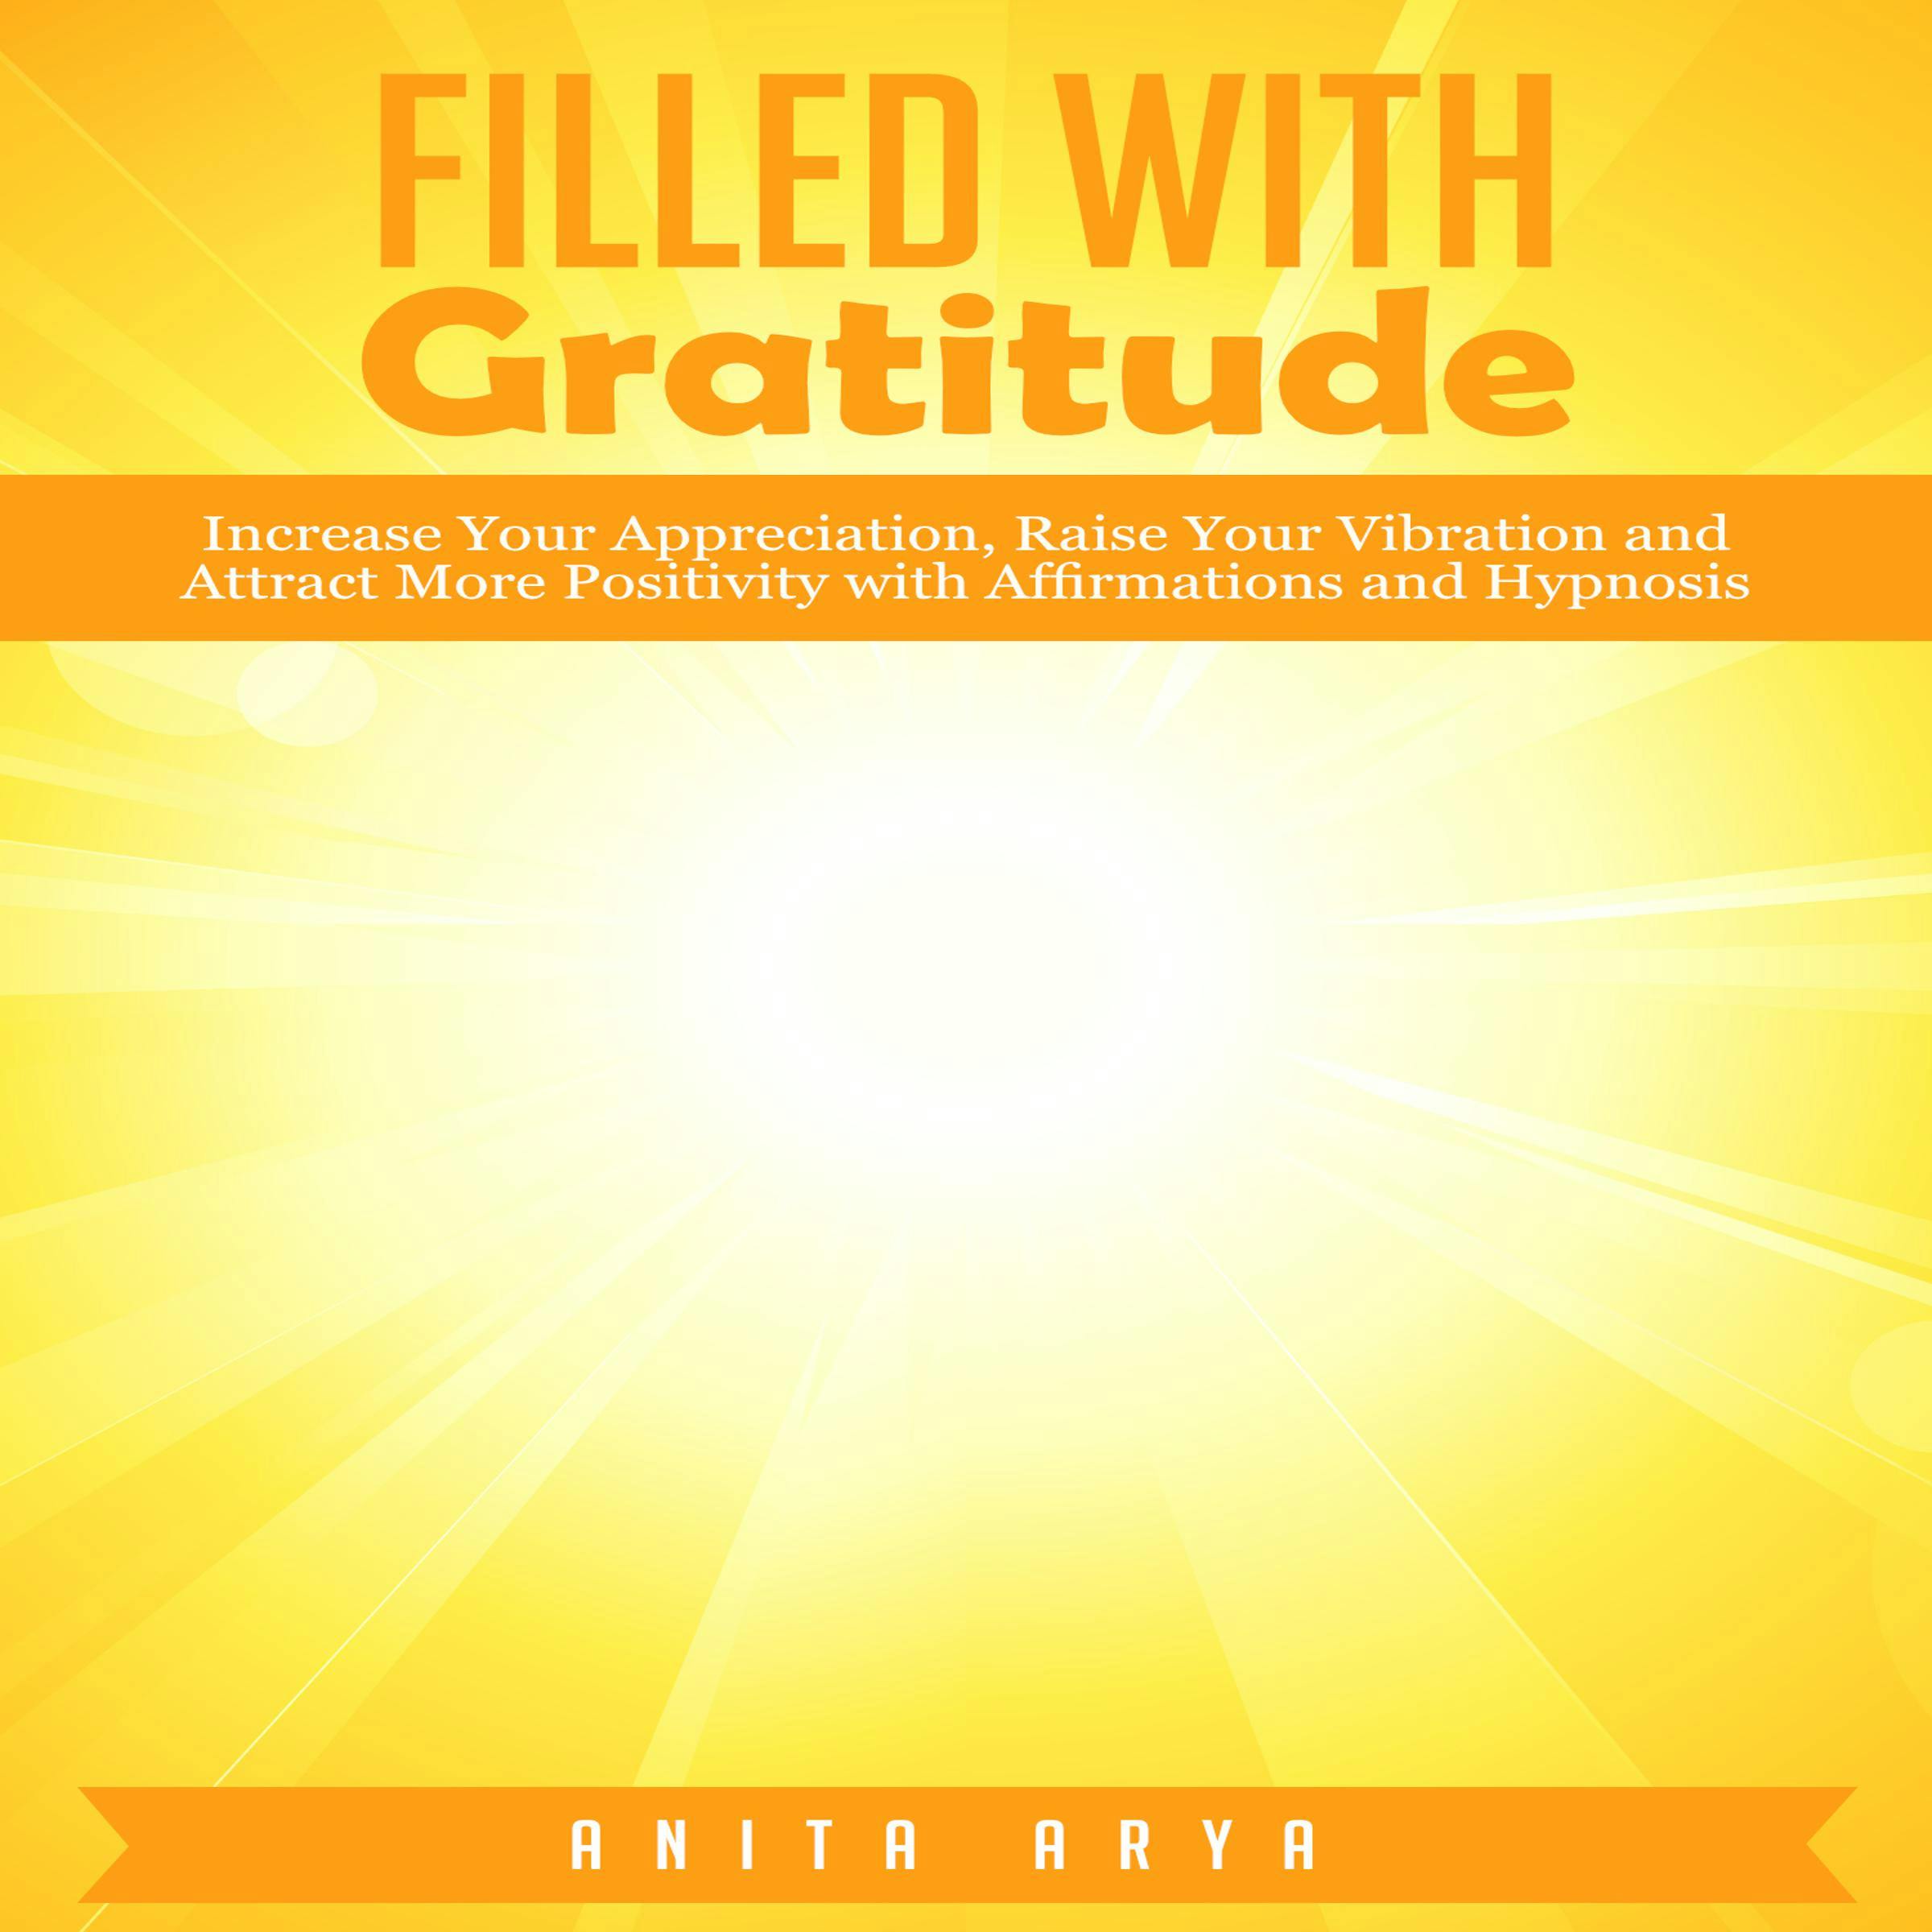 Filled With Gratitude: Increase Your Appreciation, Raise Your Vibration and Attract More Positivity with Affirmations and Hypnosis - Anita Arya